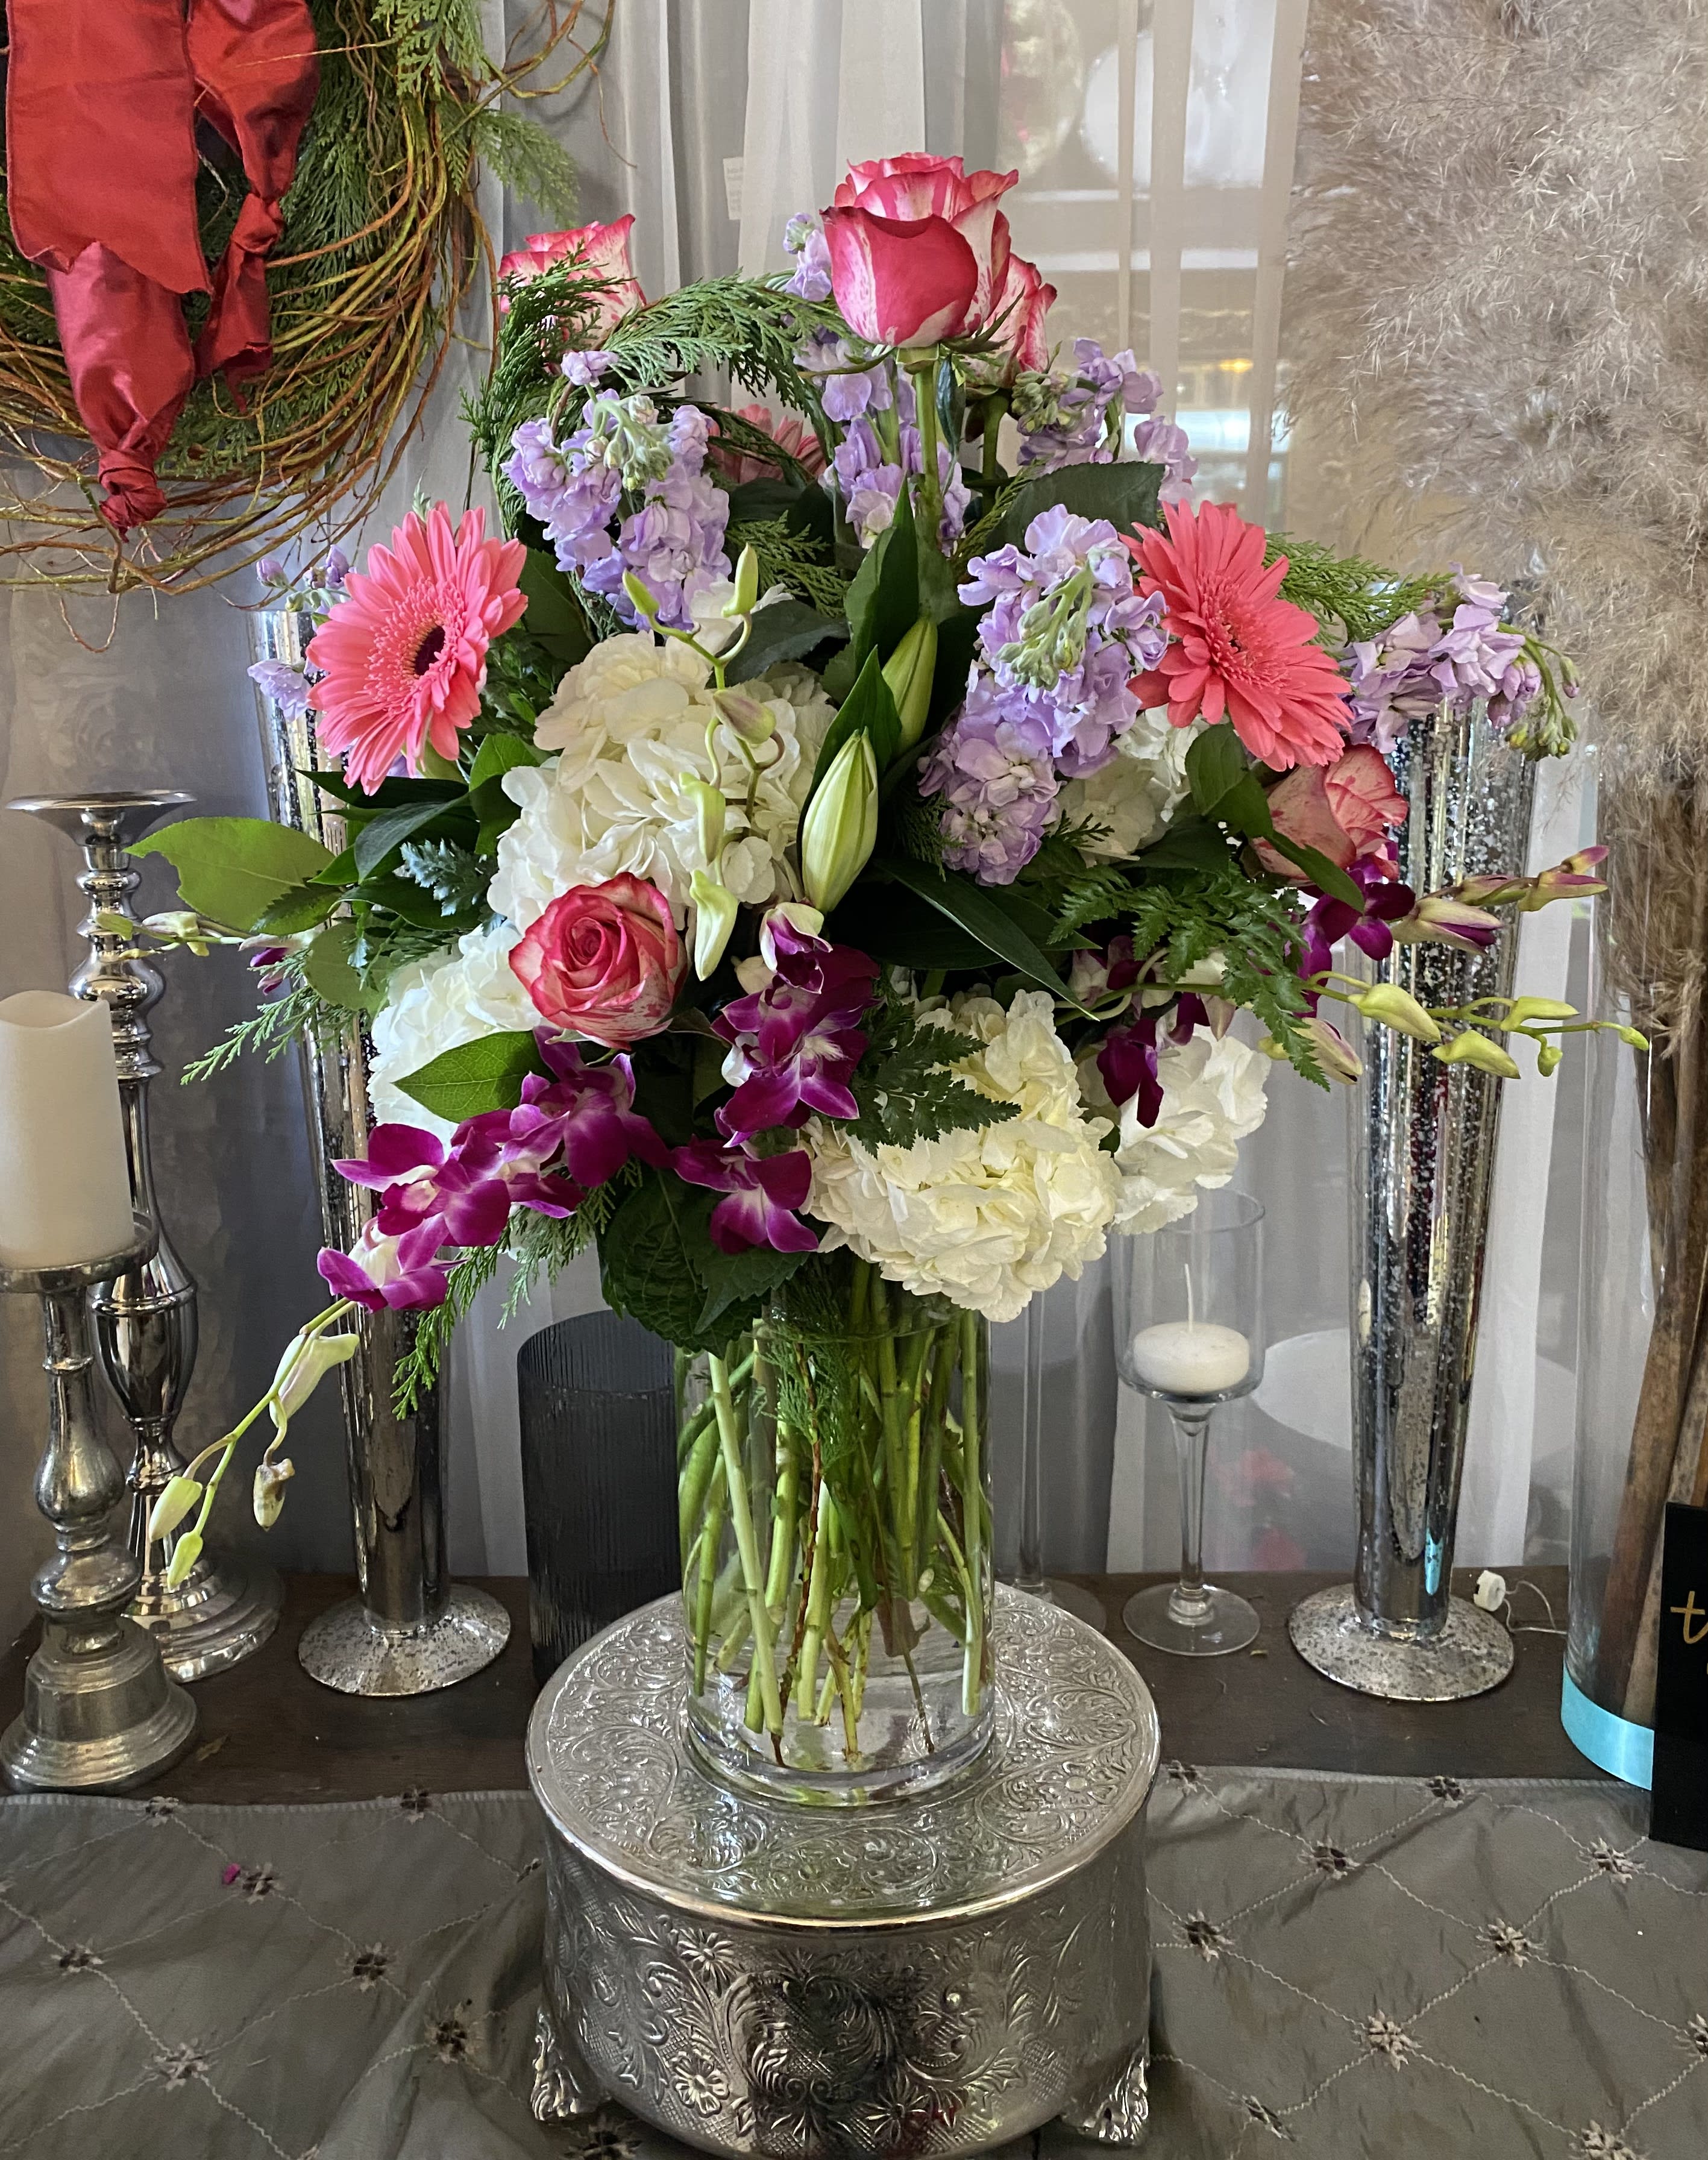 Blooming Bouquet - A tall and fun bouquet to brighten up any space.